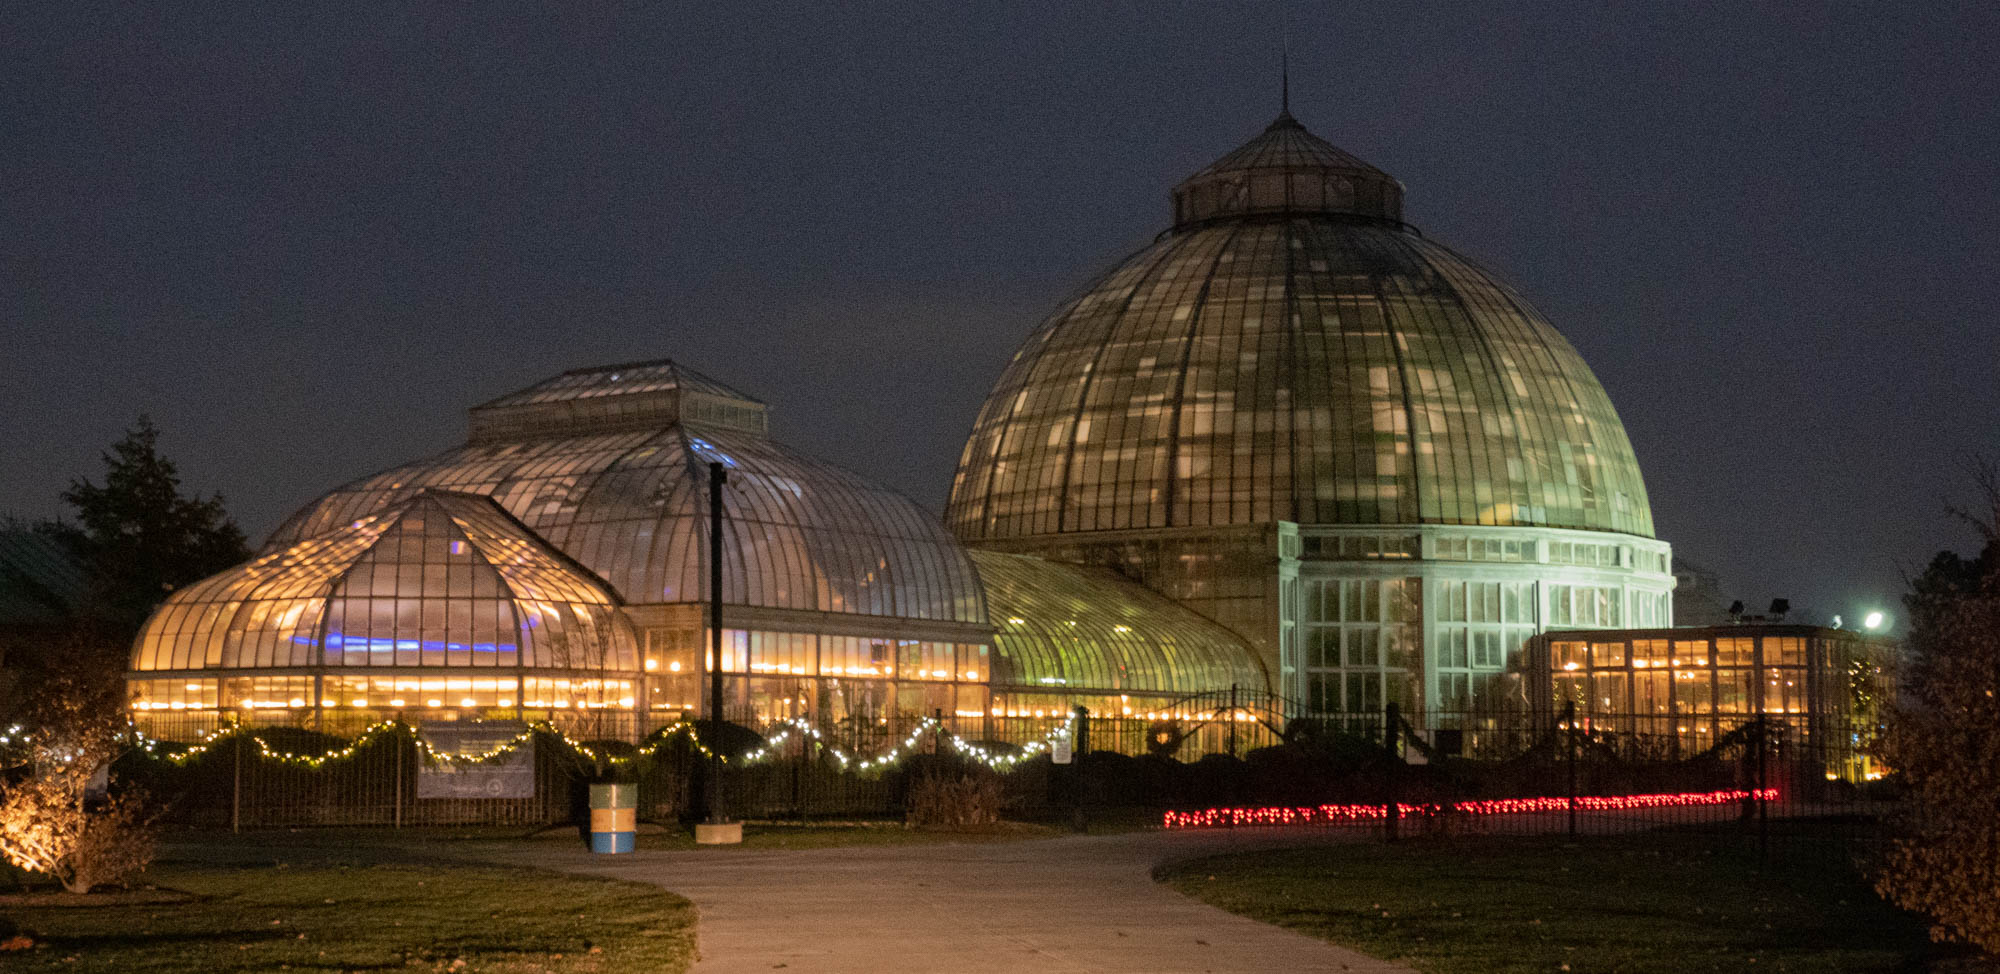 Belle Isle Conservatory lite up at night.